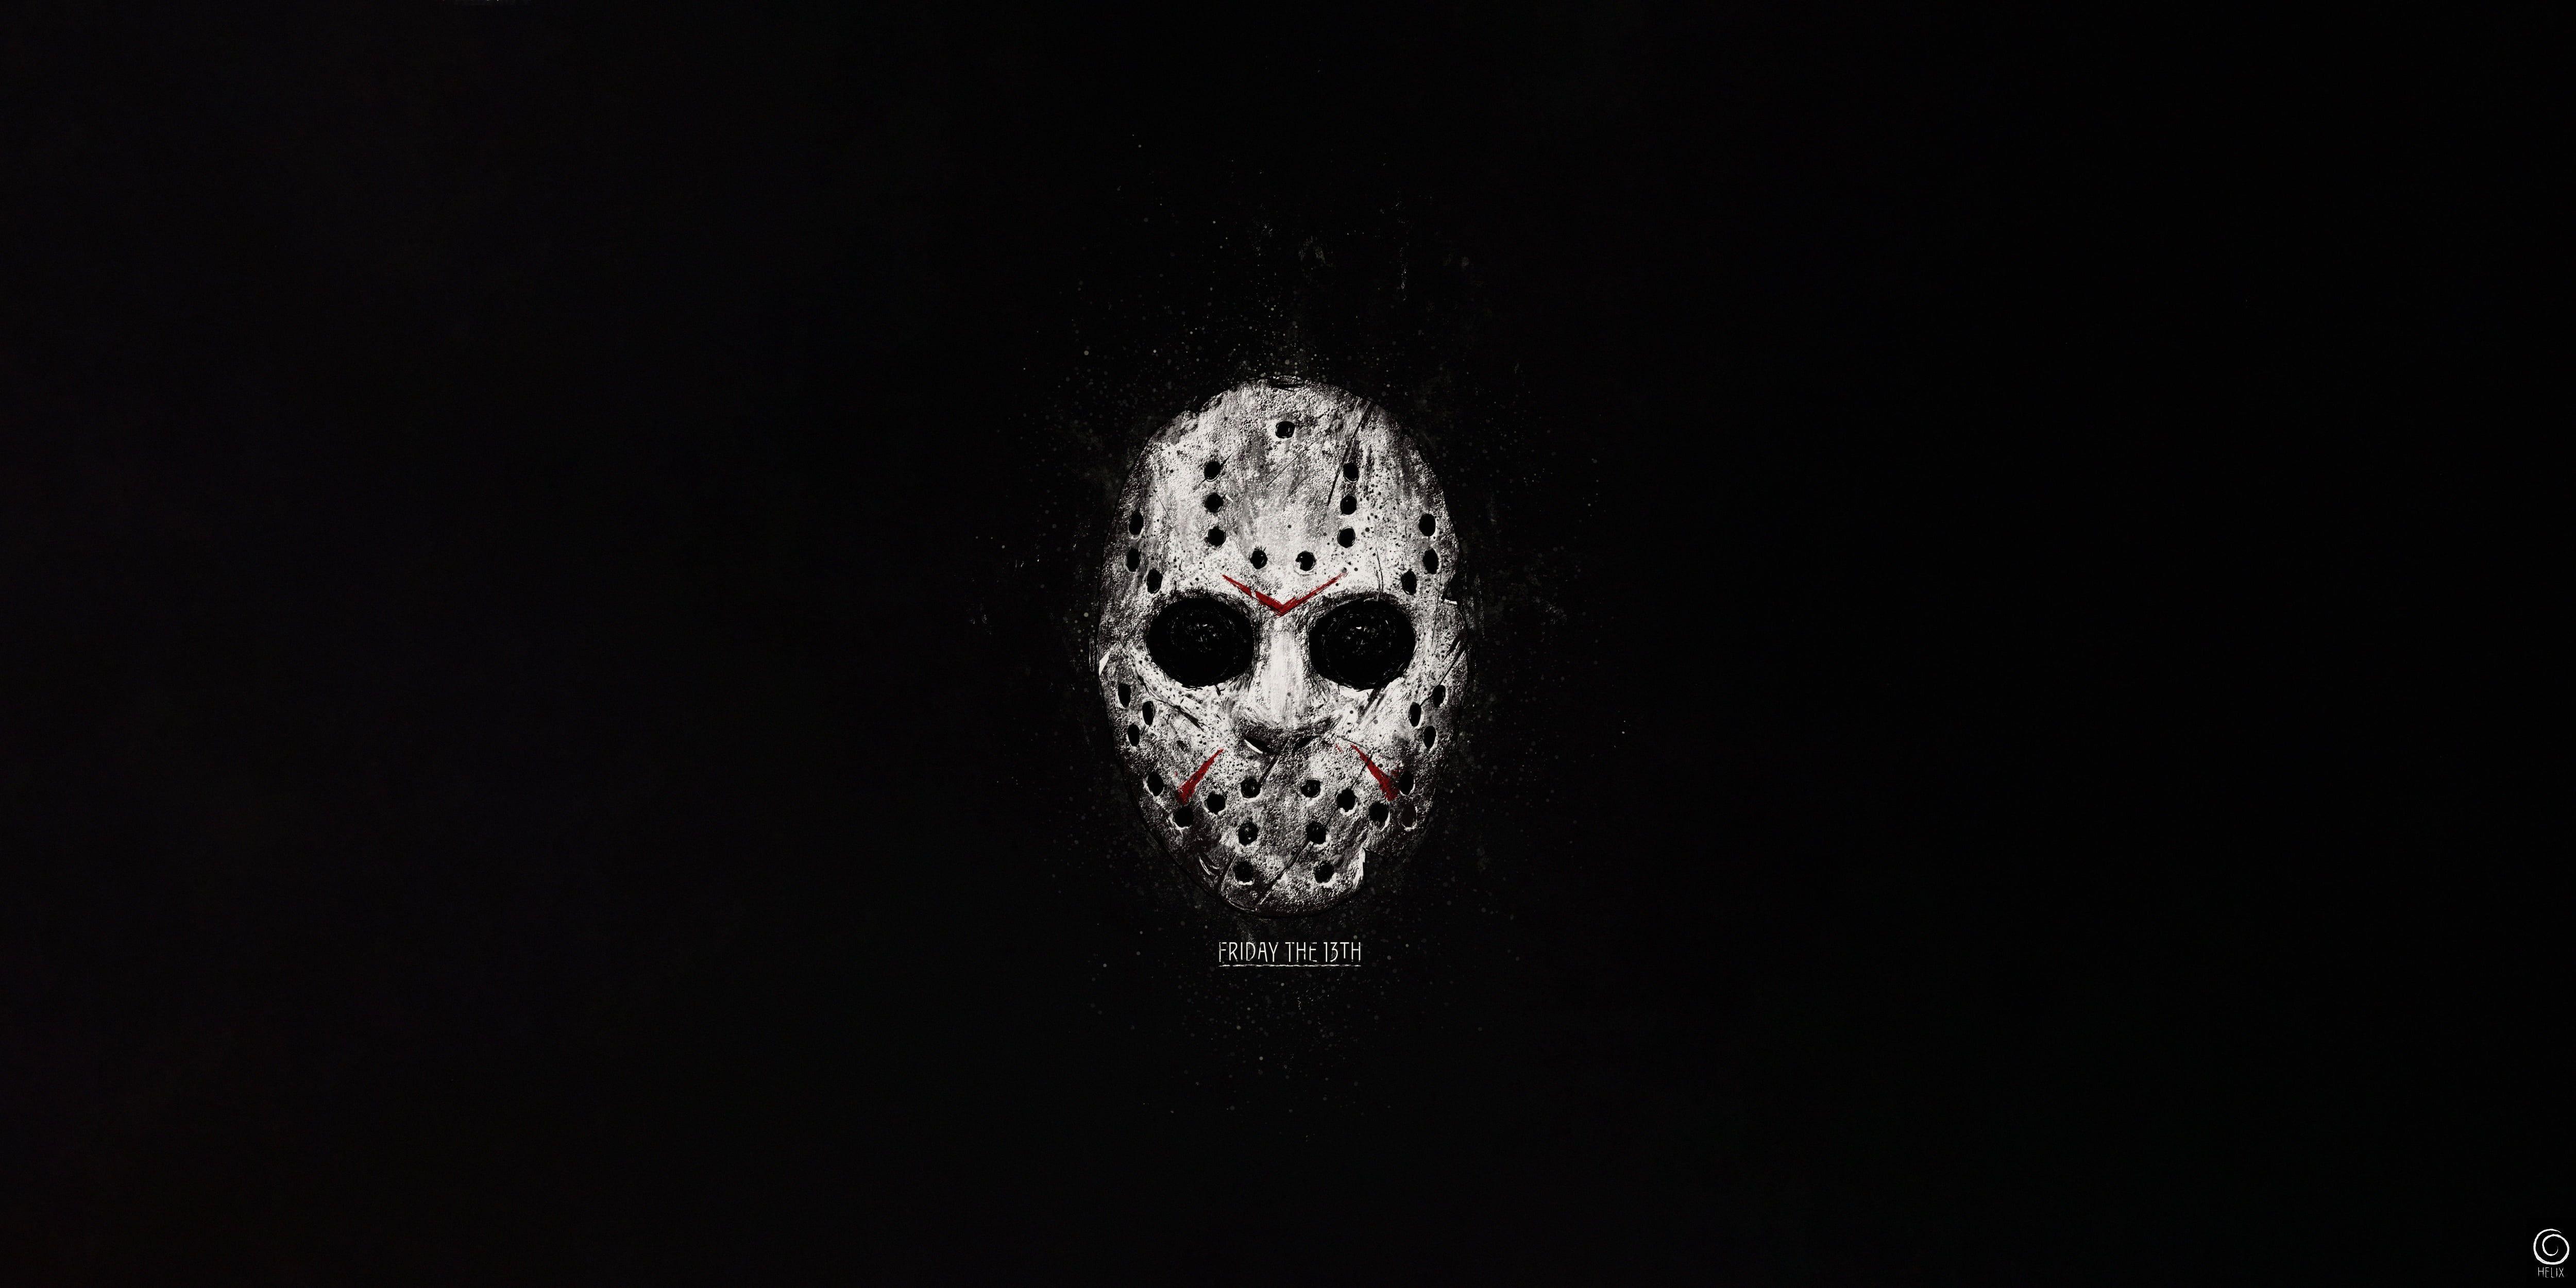 'Friday the 13th's Jason Voorhees joins 'Mortal Kombat'